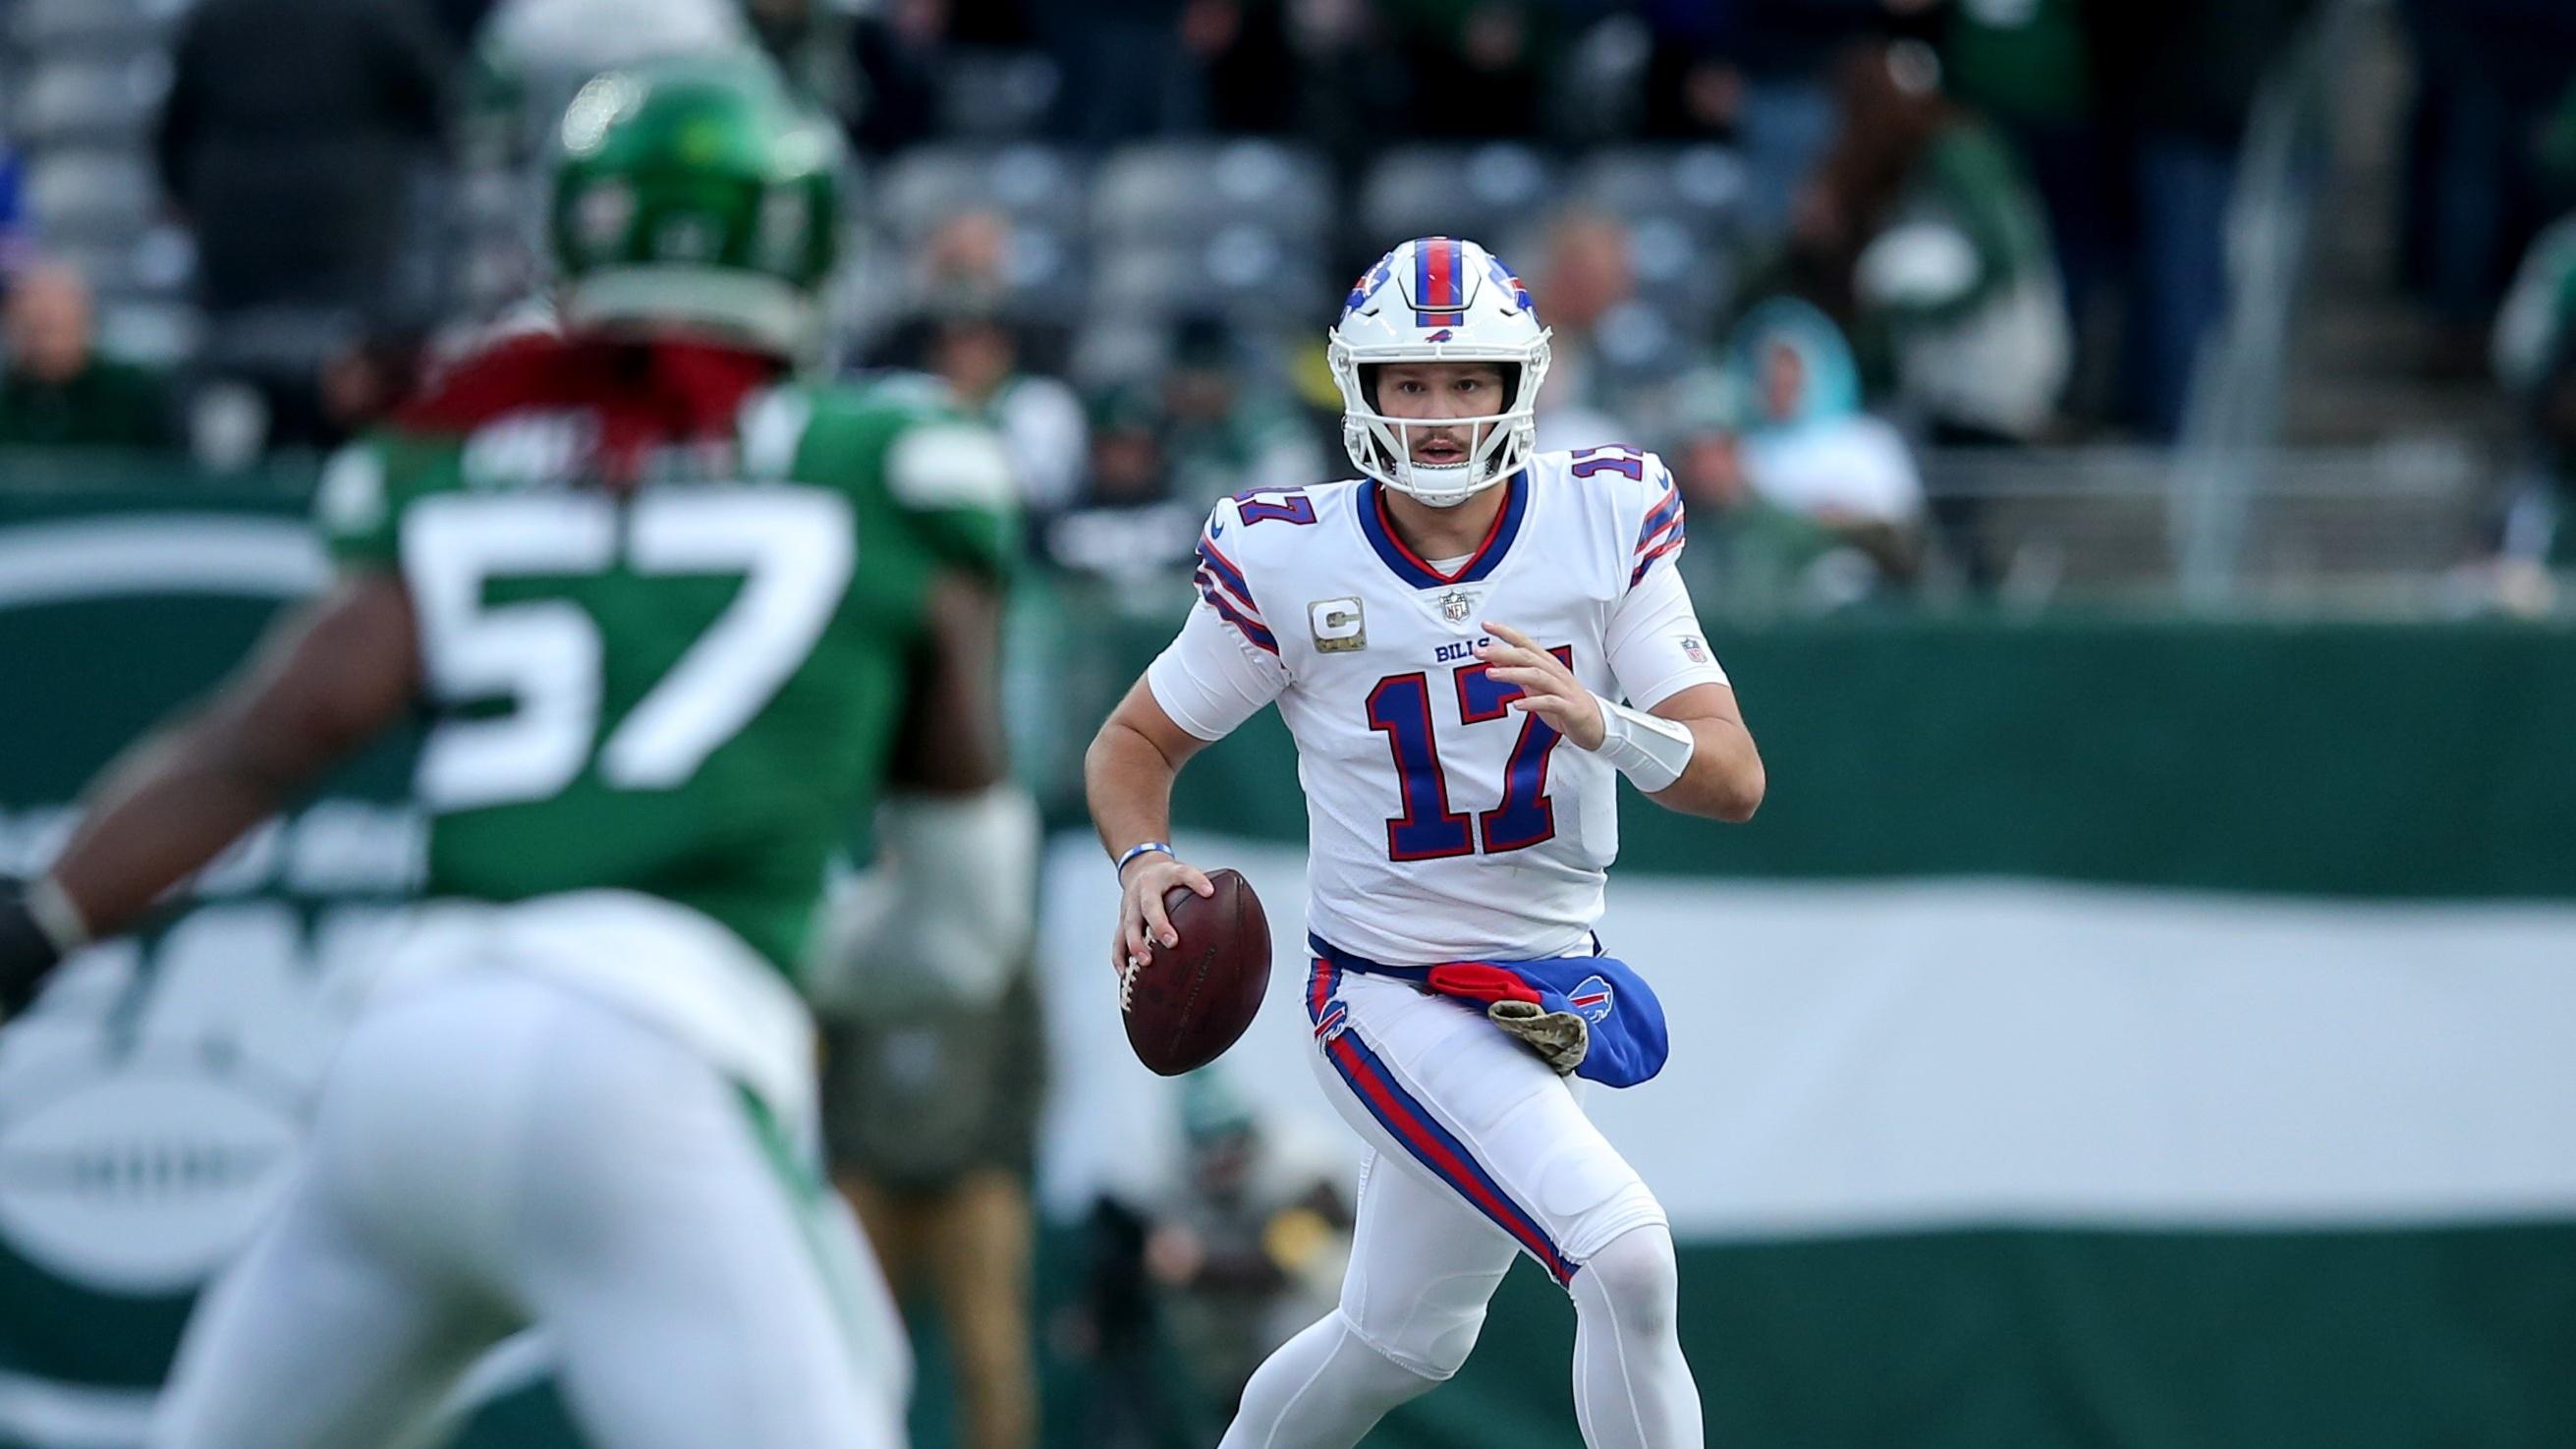 Nov 14, 2021; East Rutherford, New Jersey, USA; Buffalo Bills quarterback Josh Allen (17) runs with the ball against the New York Jets during the third quarter at MetLife Stadium. Mandatory Credit: Brad Penner-USA TODAY Sports / © Brad Penner-USA TODAY Sports